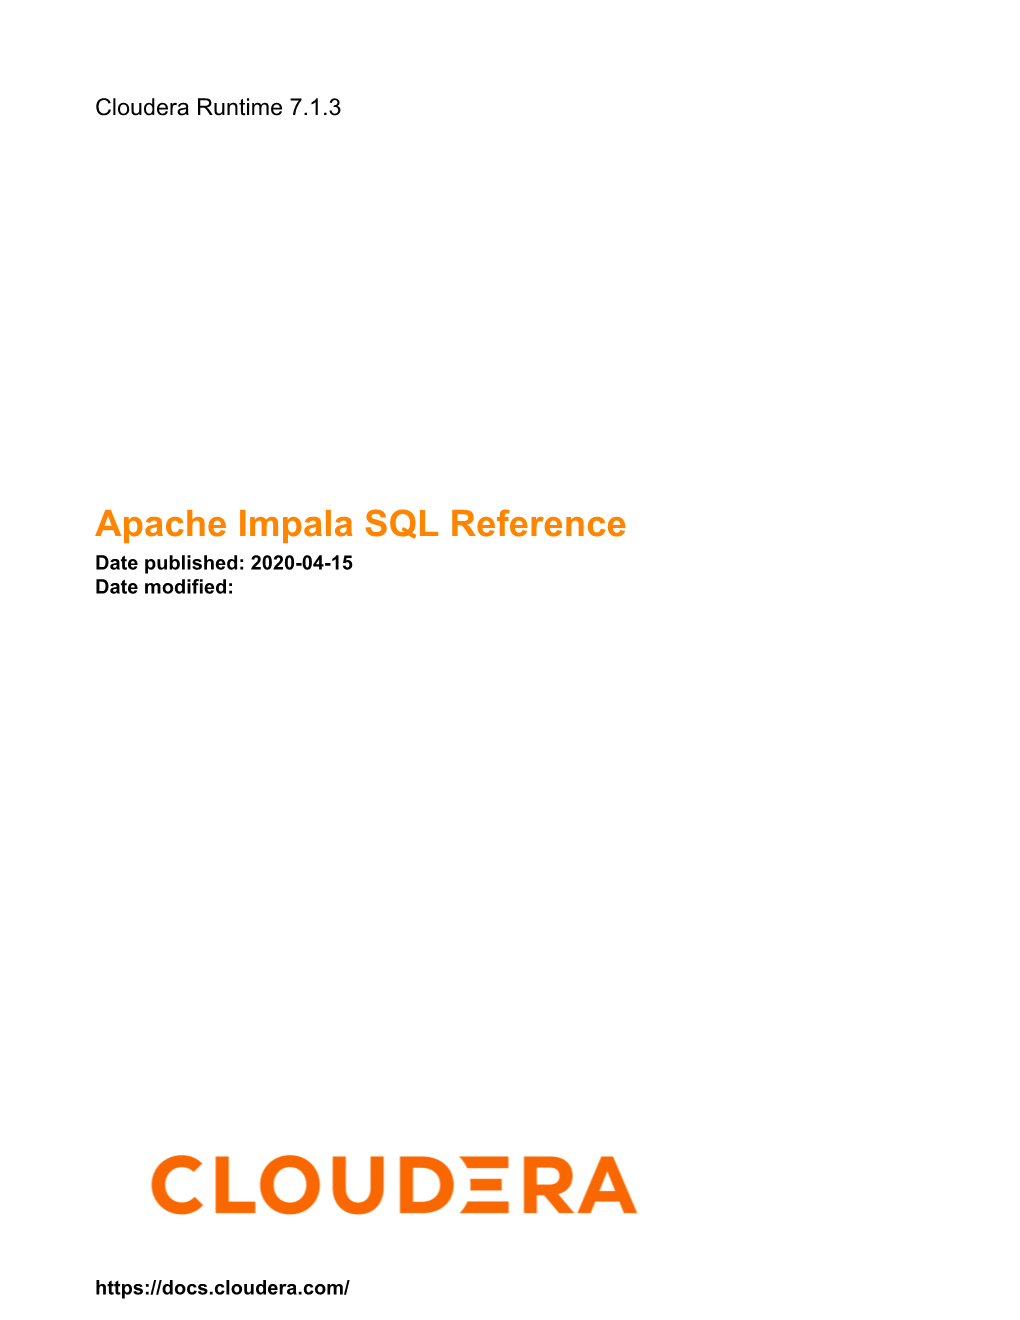 Apache Impala SQL Reference Date Published: 2020-04-15 Date Modified